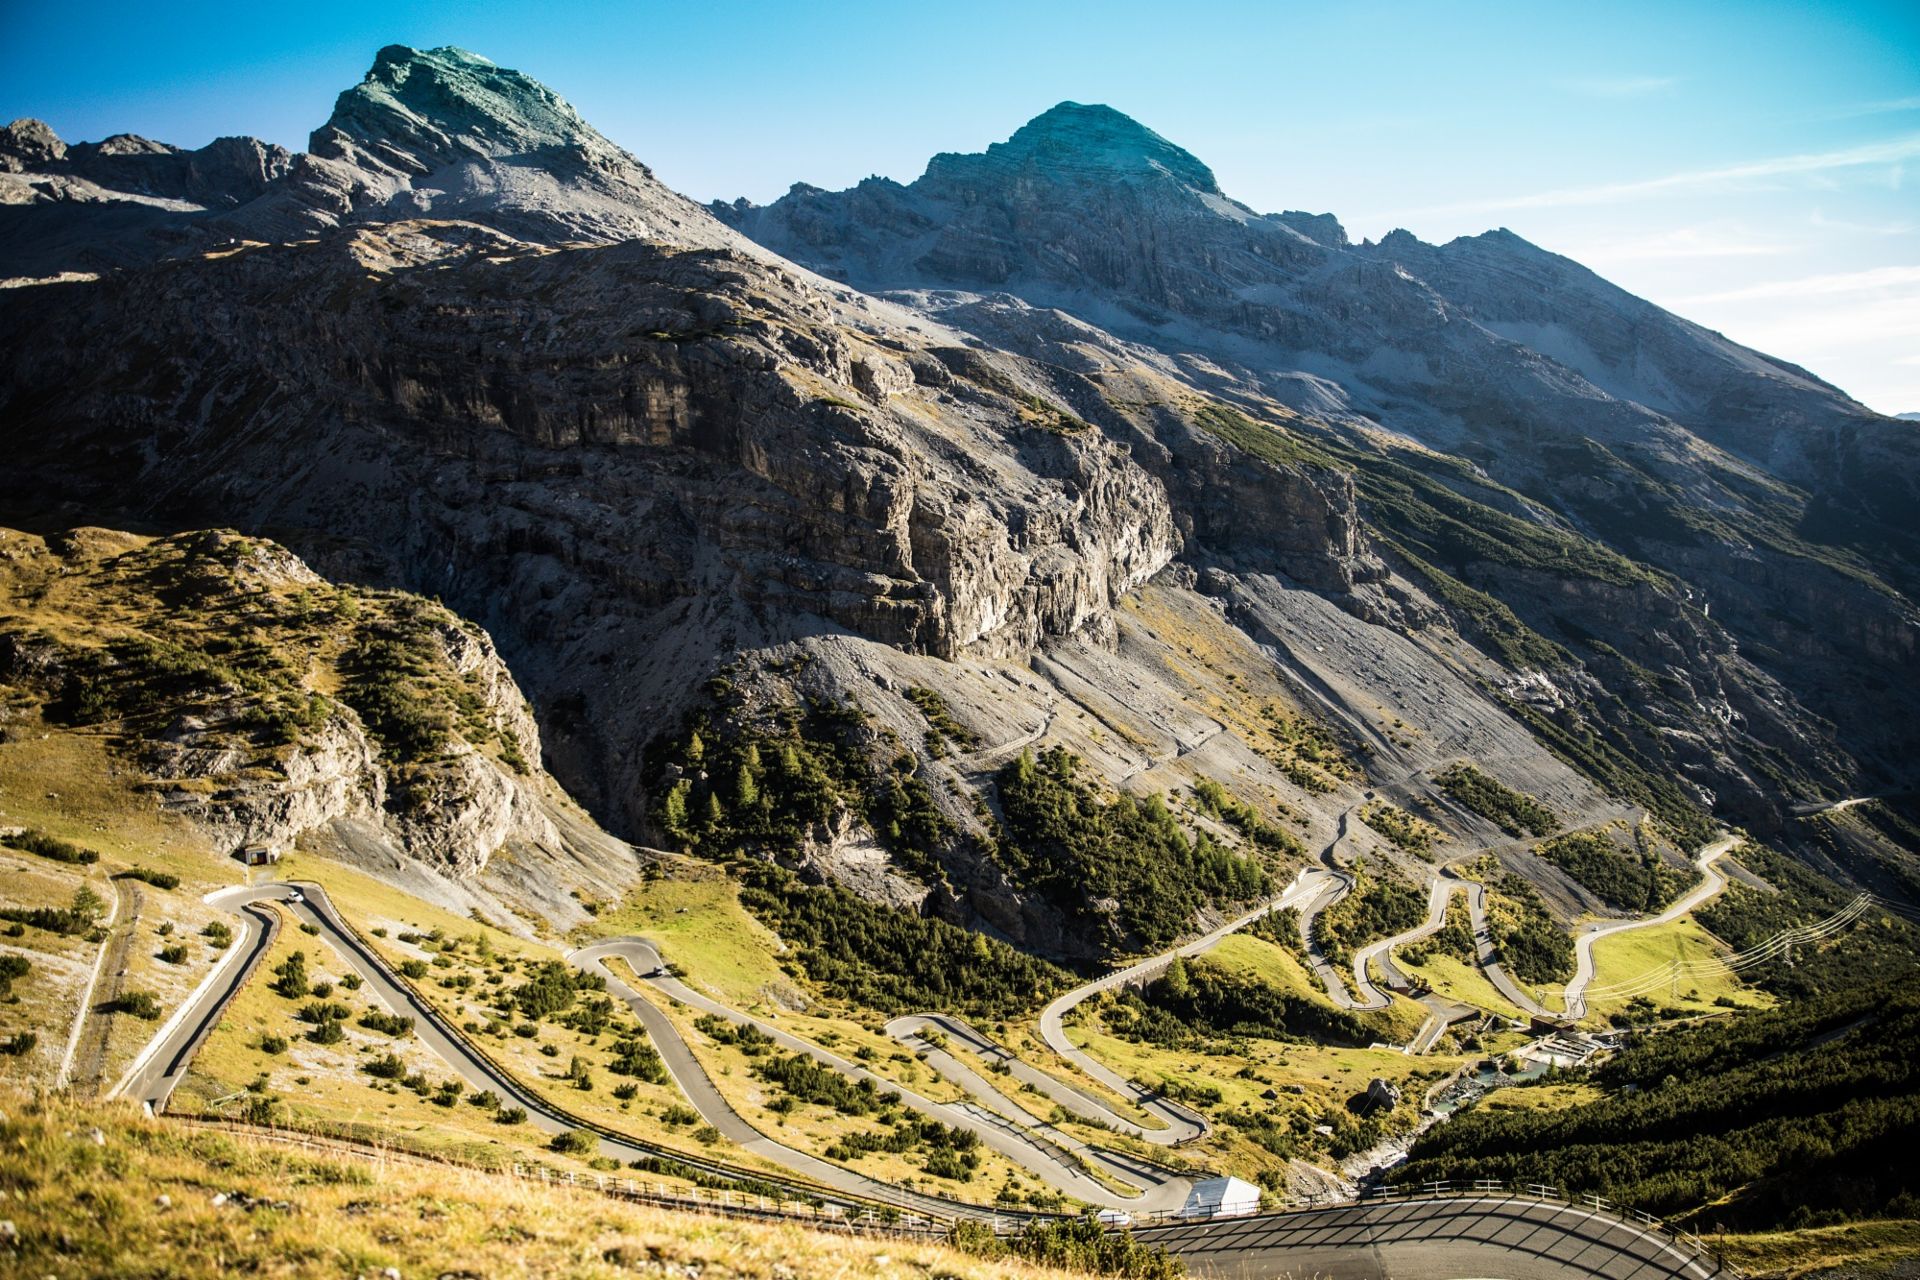 About 3,900 vertical meters have to be conquered on the Stelvio line.